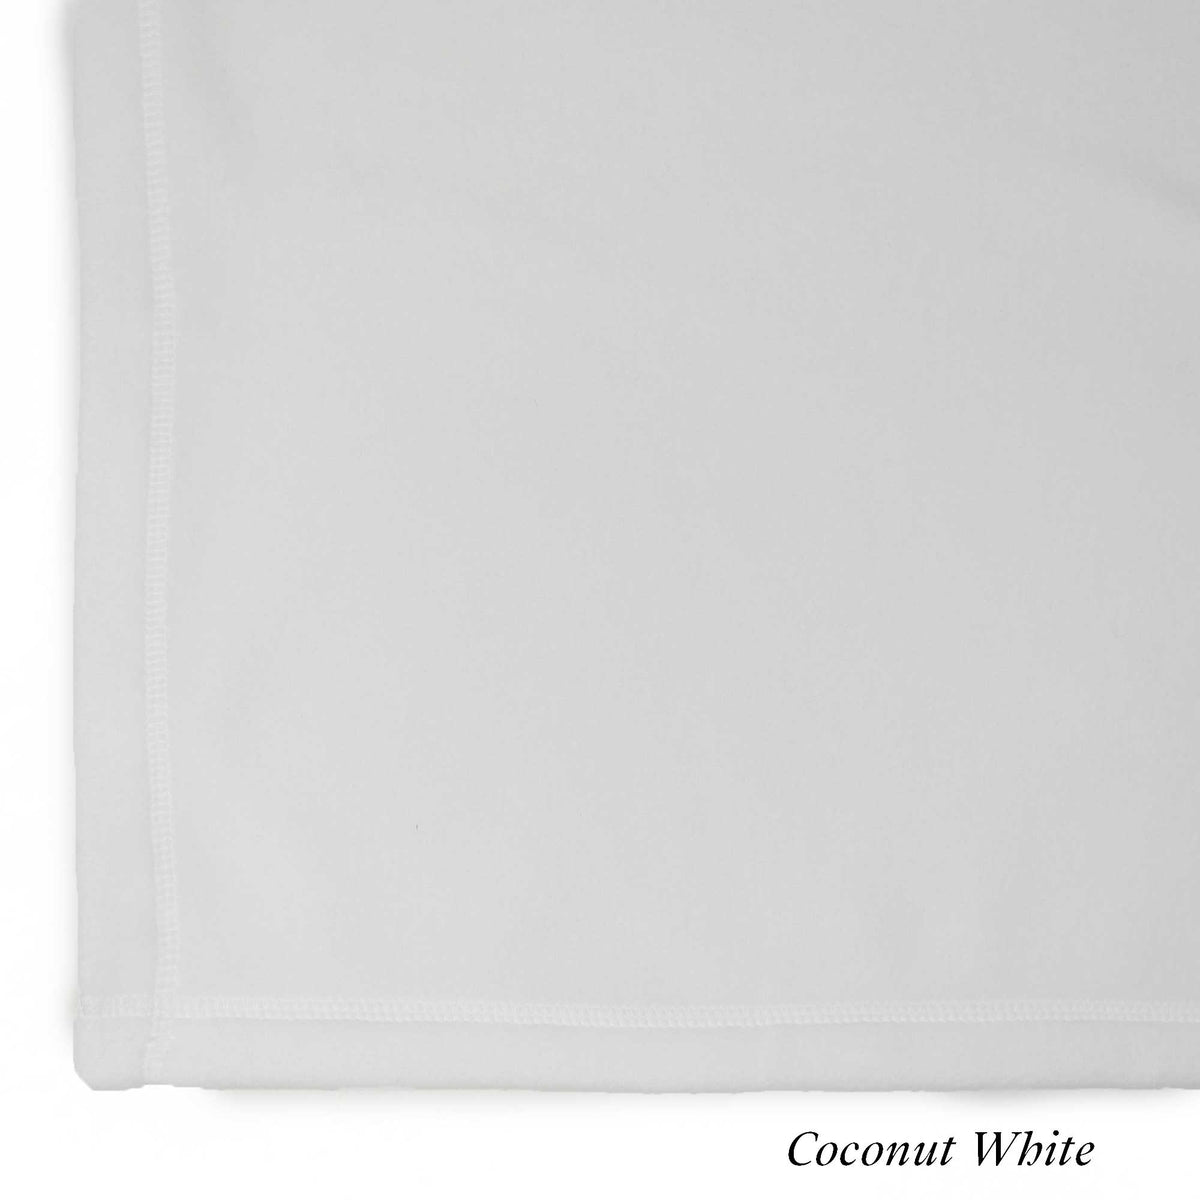 Coconut White - Big Ricky&#39;s Microfiber Cleaning Cloths - Micro Fiber Cleaning Cloths - American Blanket Company